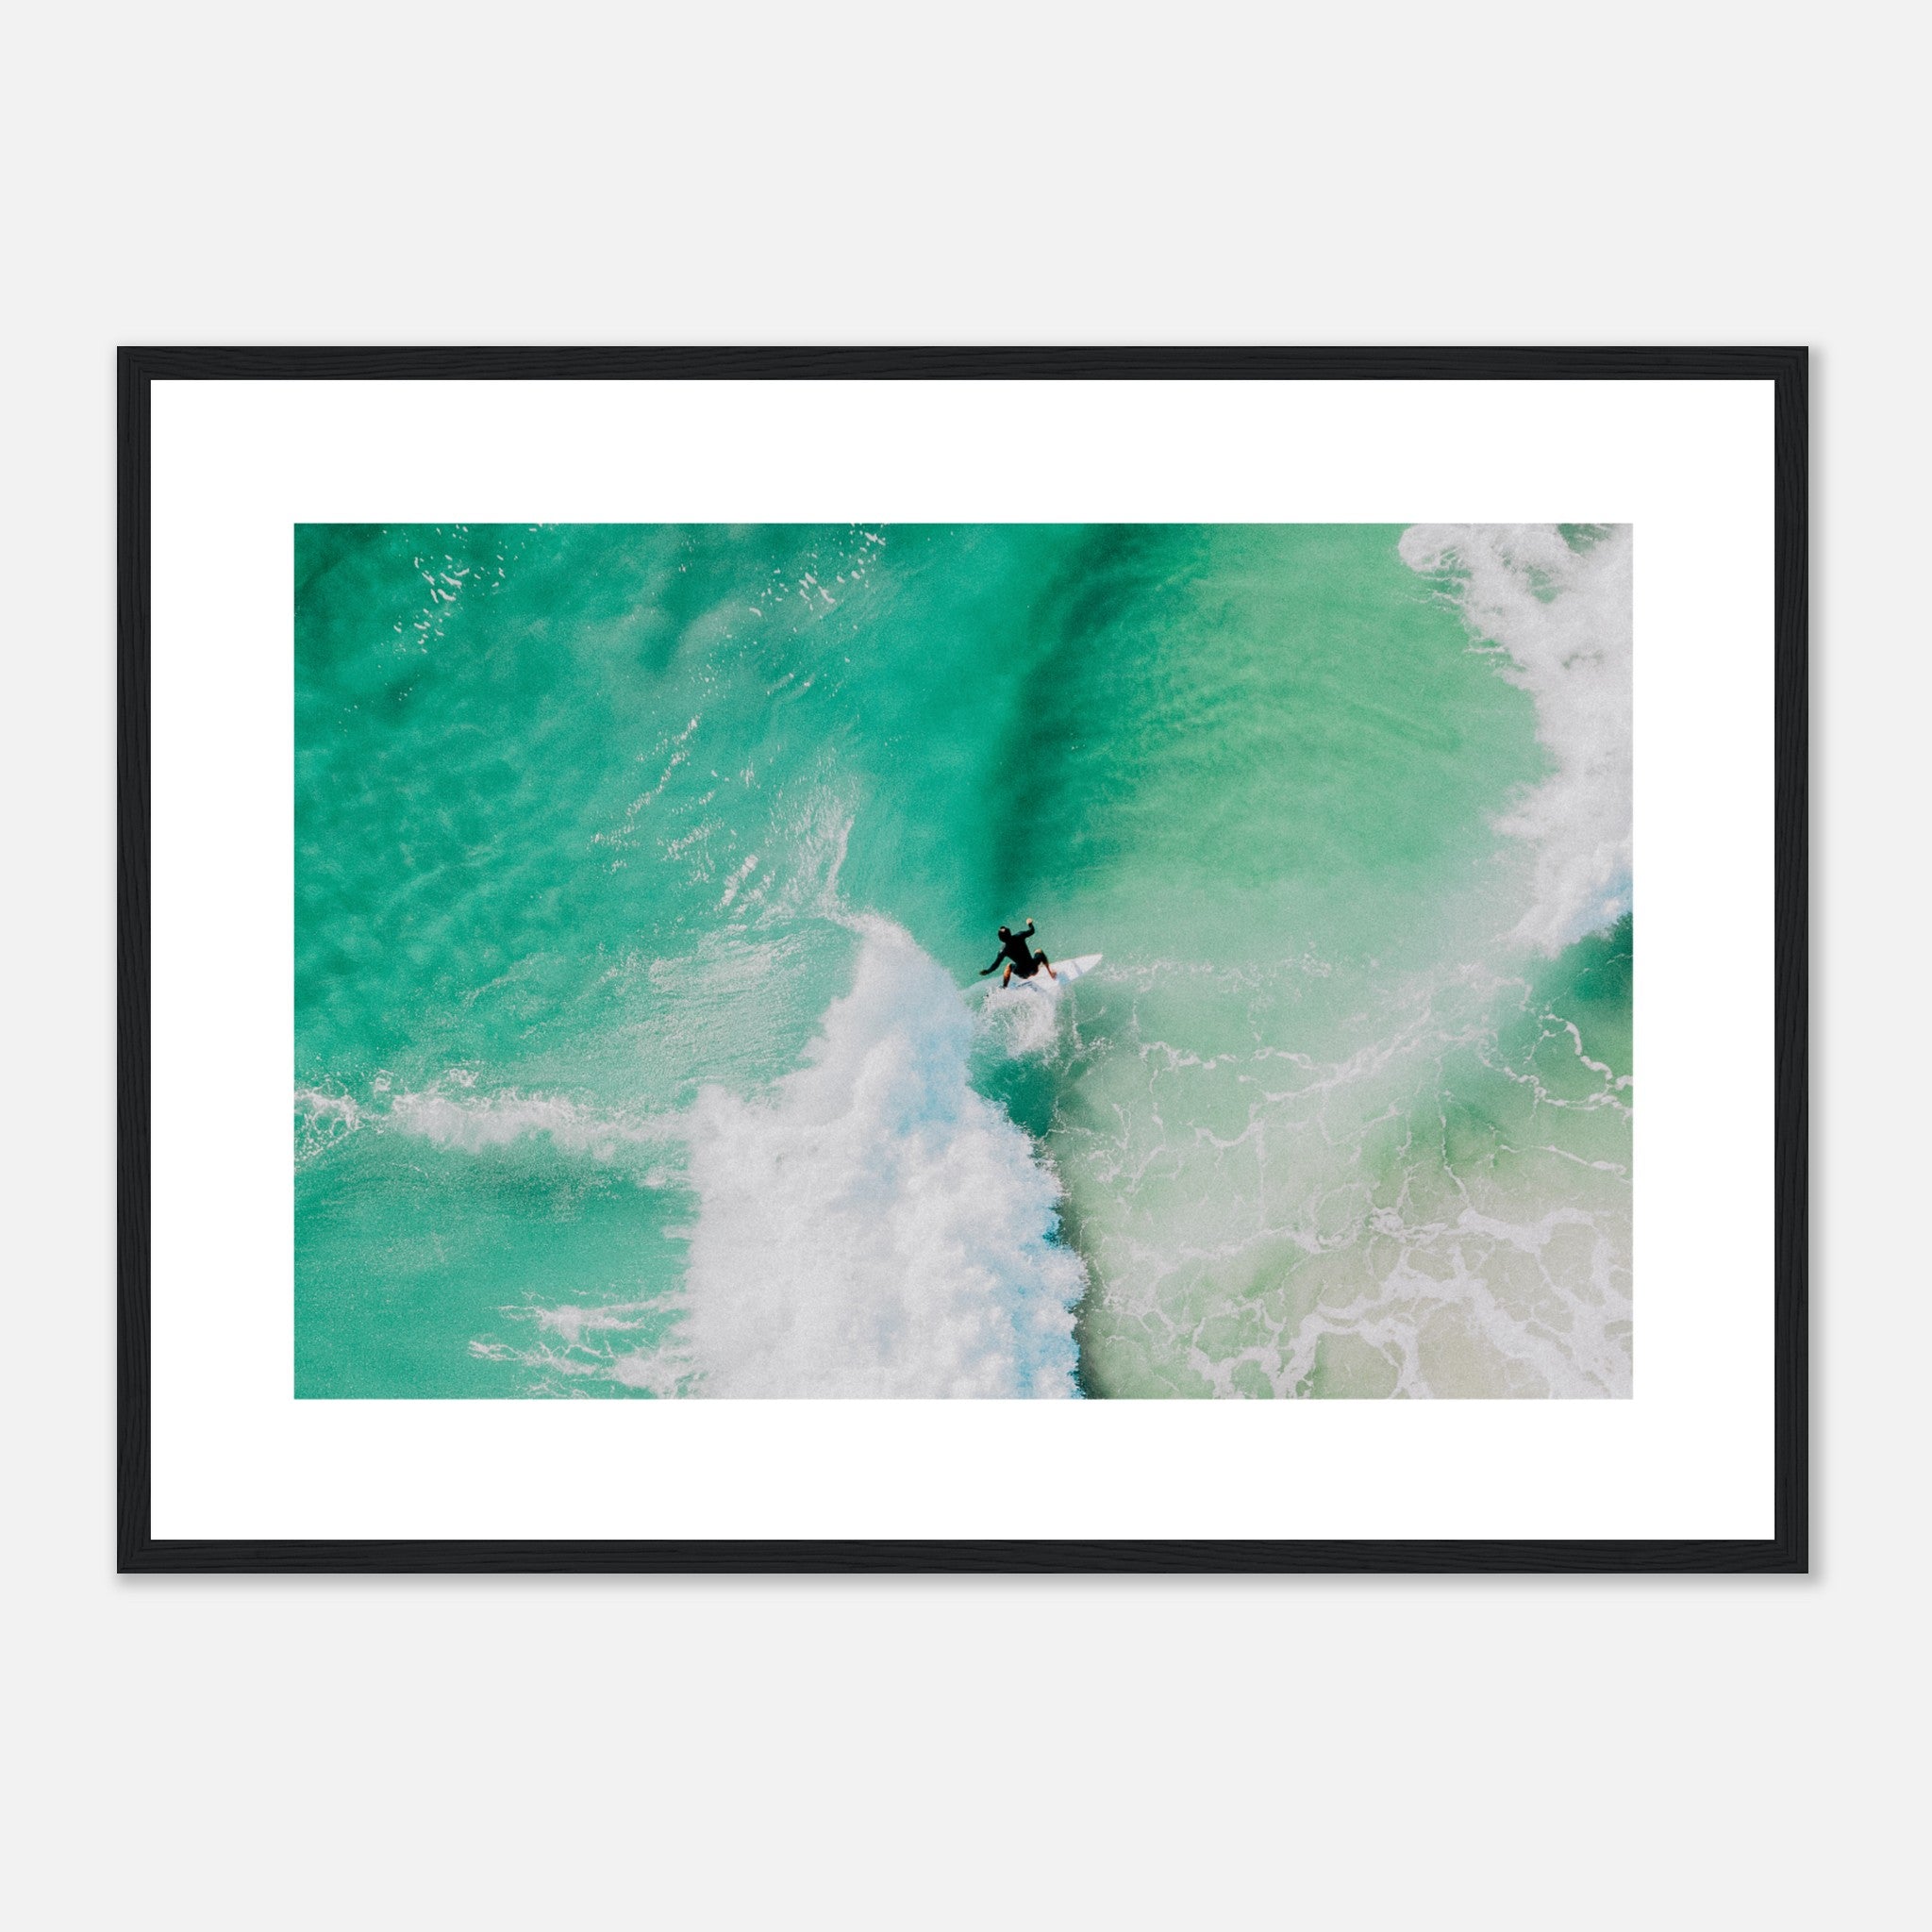 Riding Waves Poster